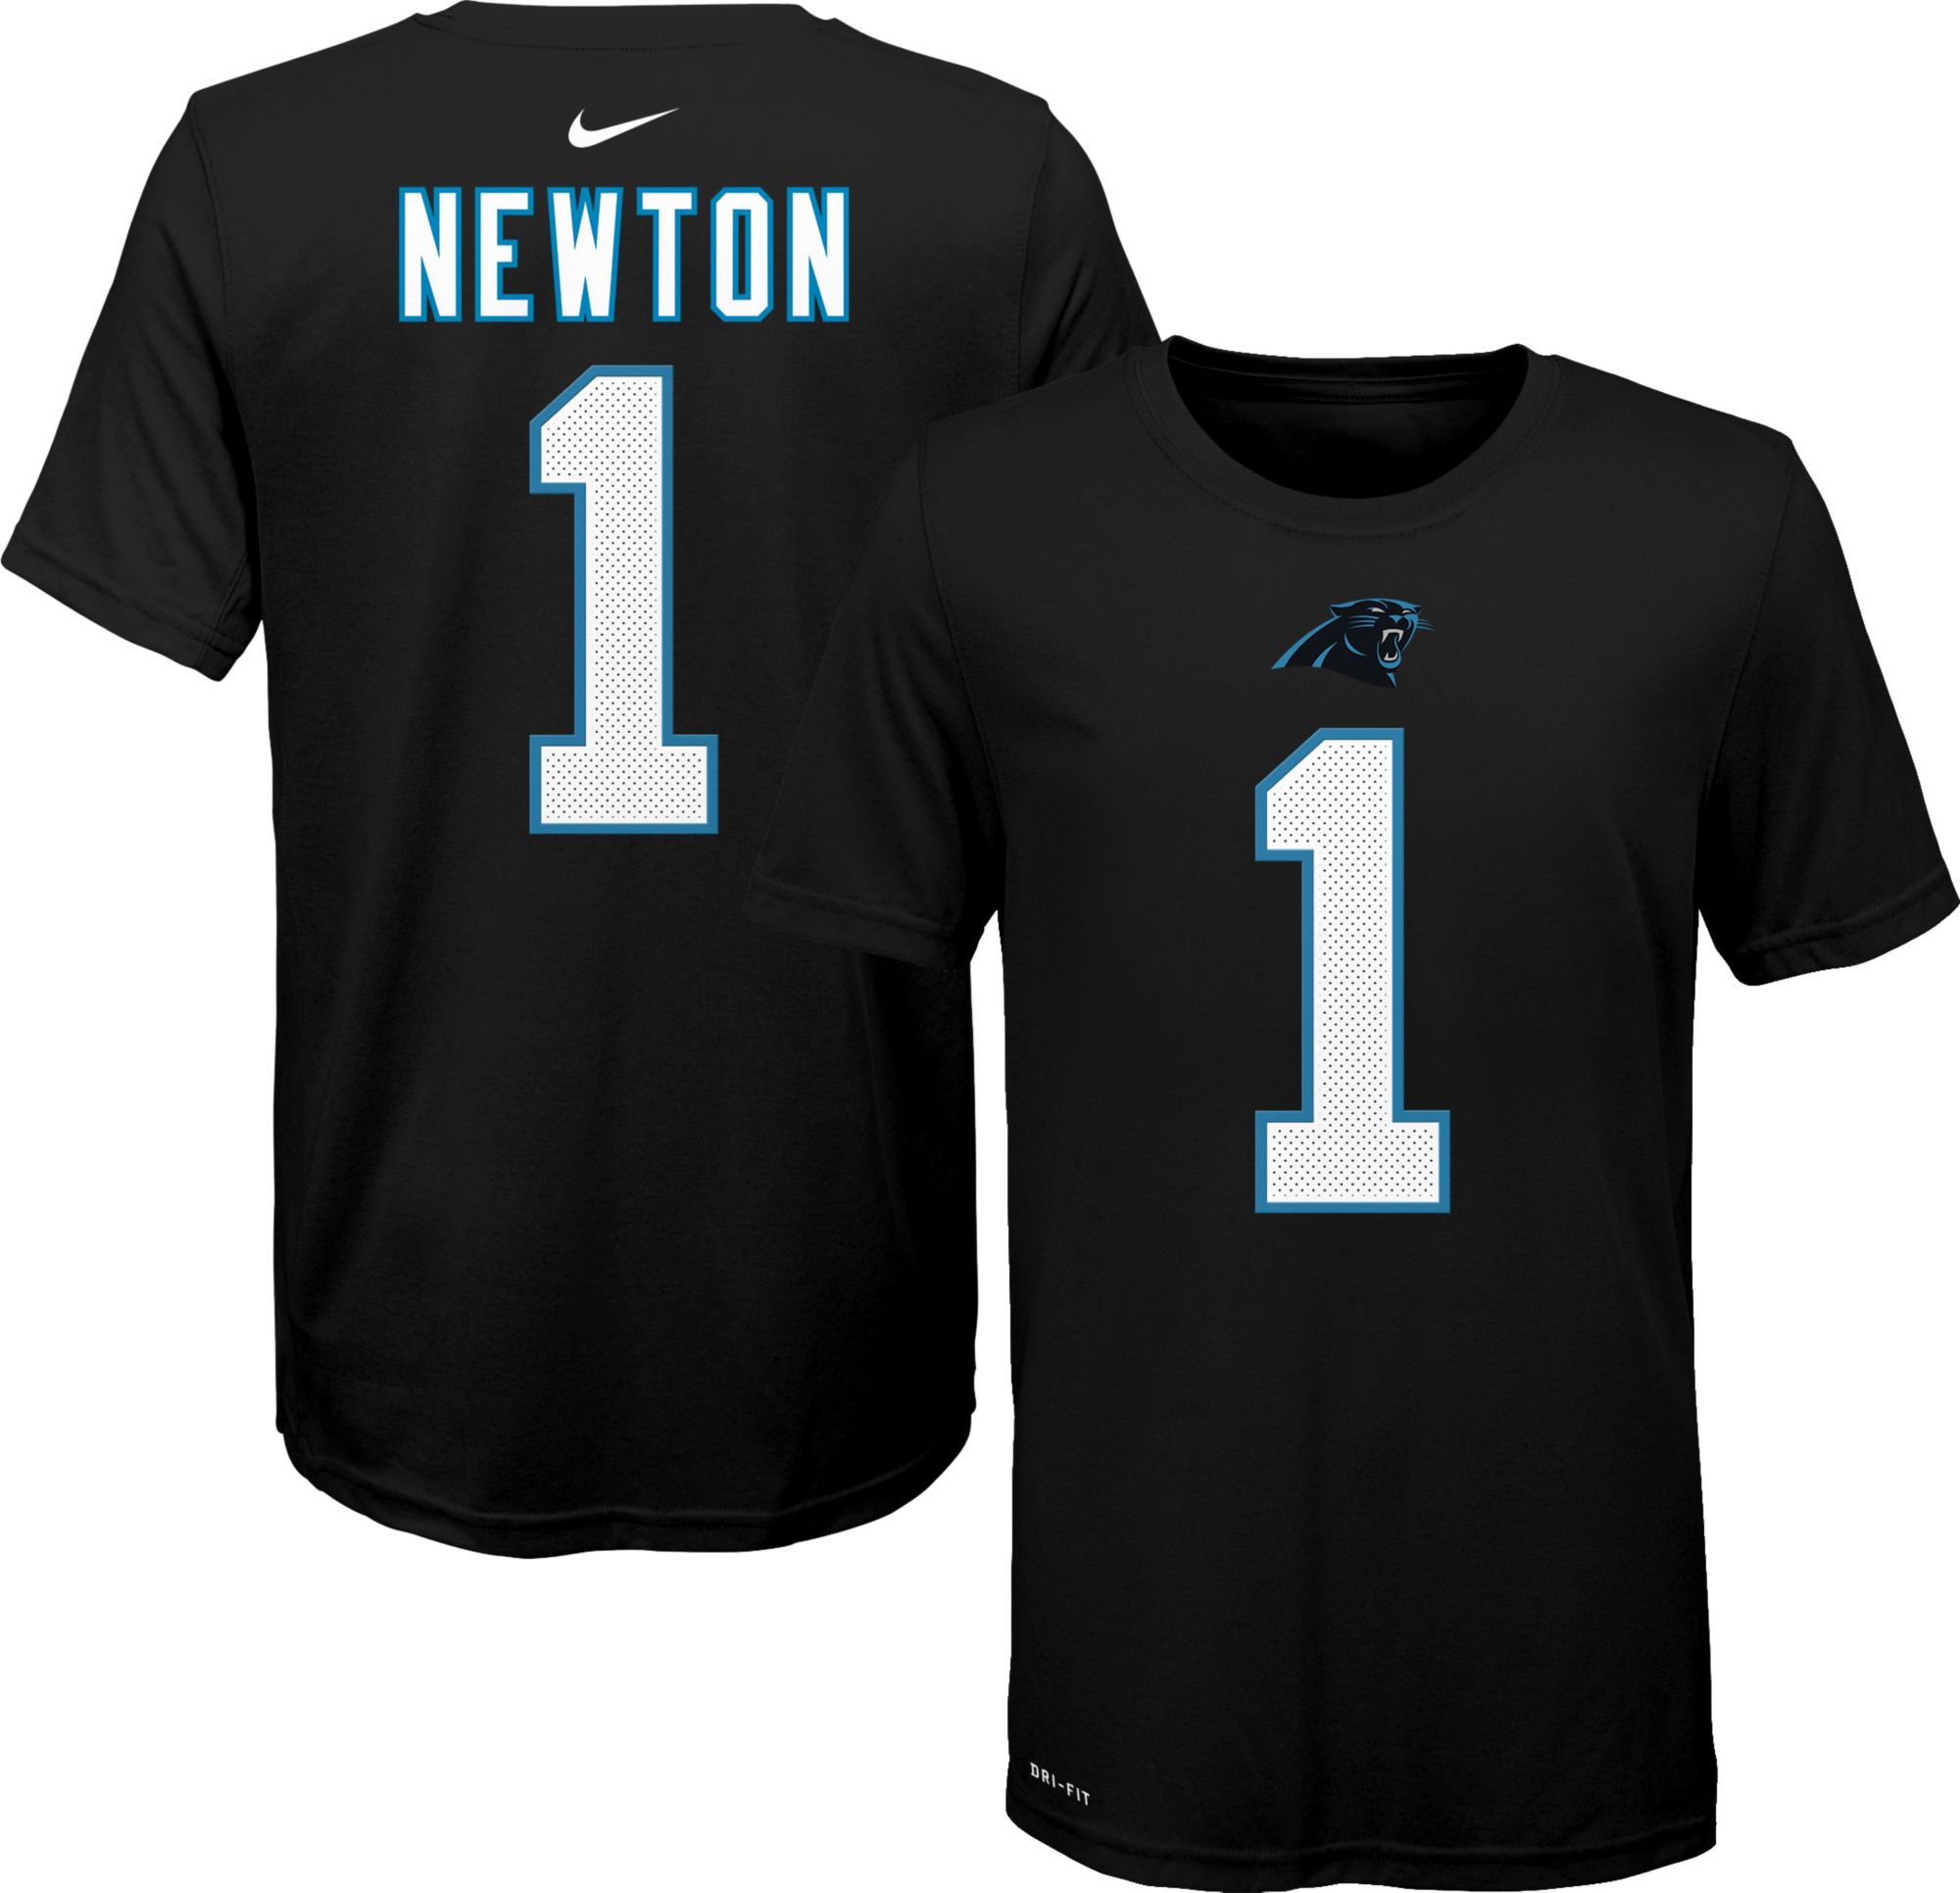 youth xl cam newton jersey